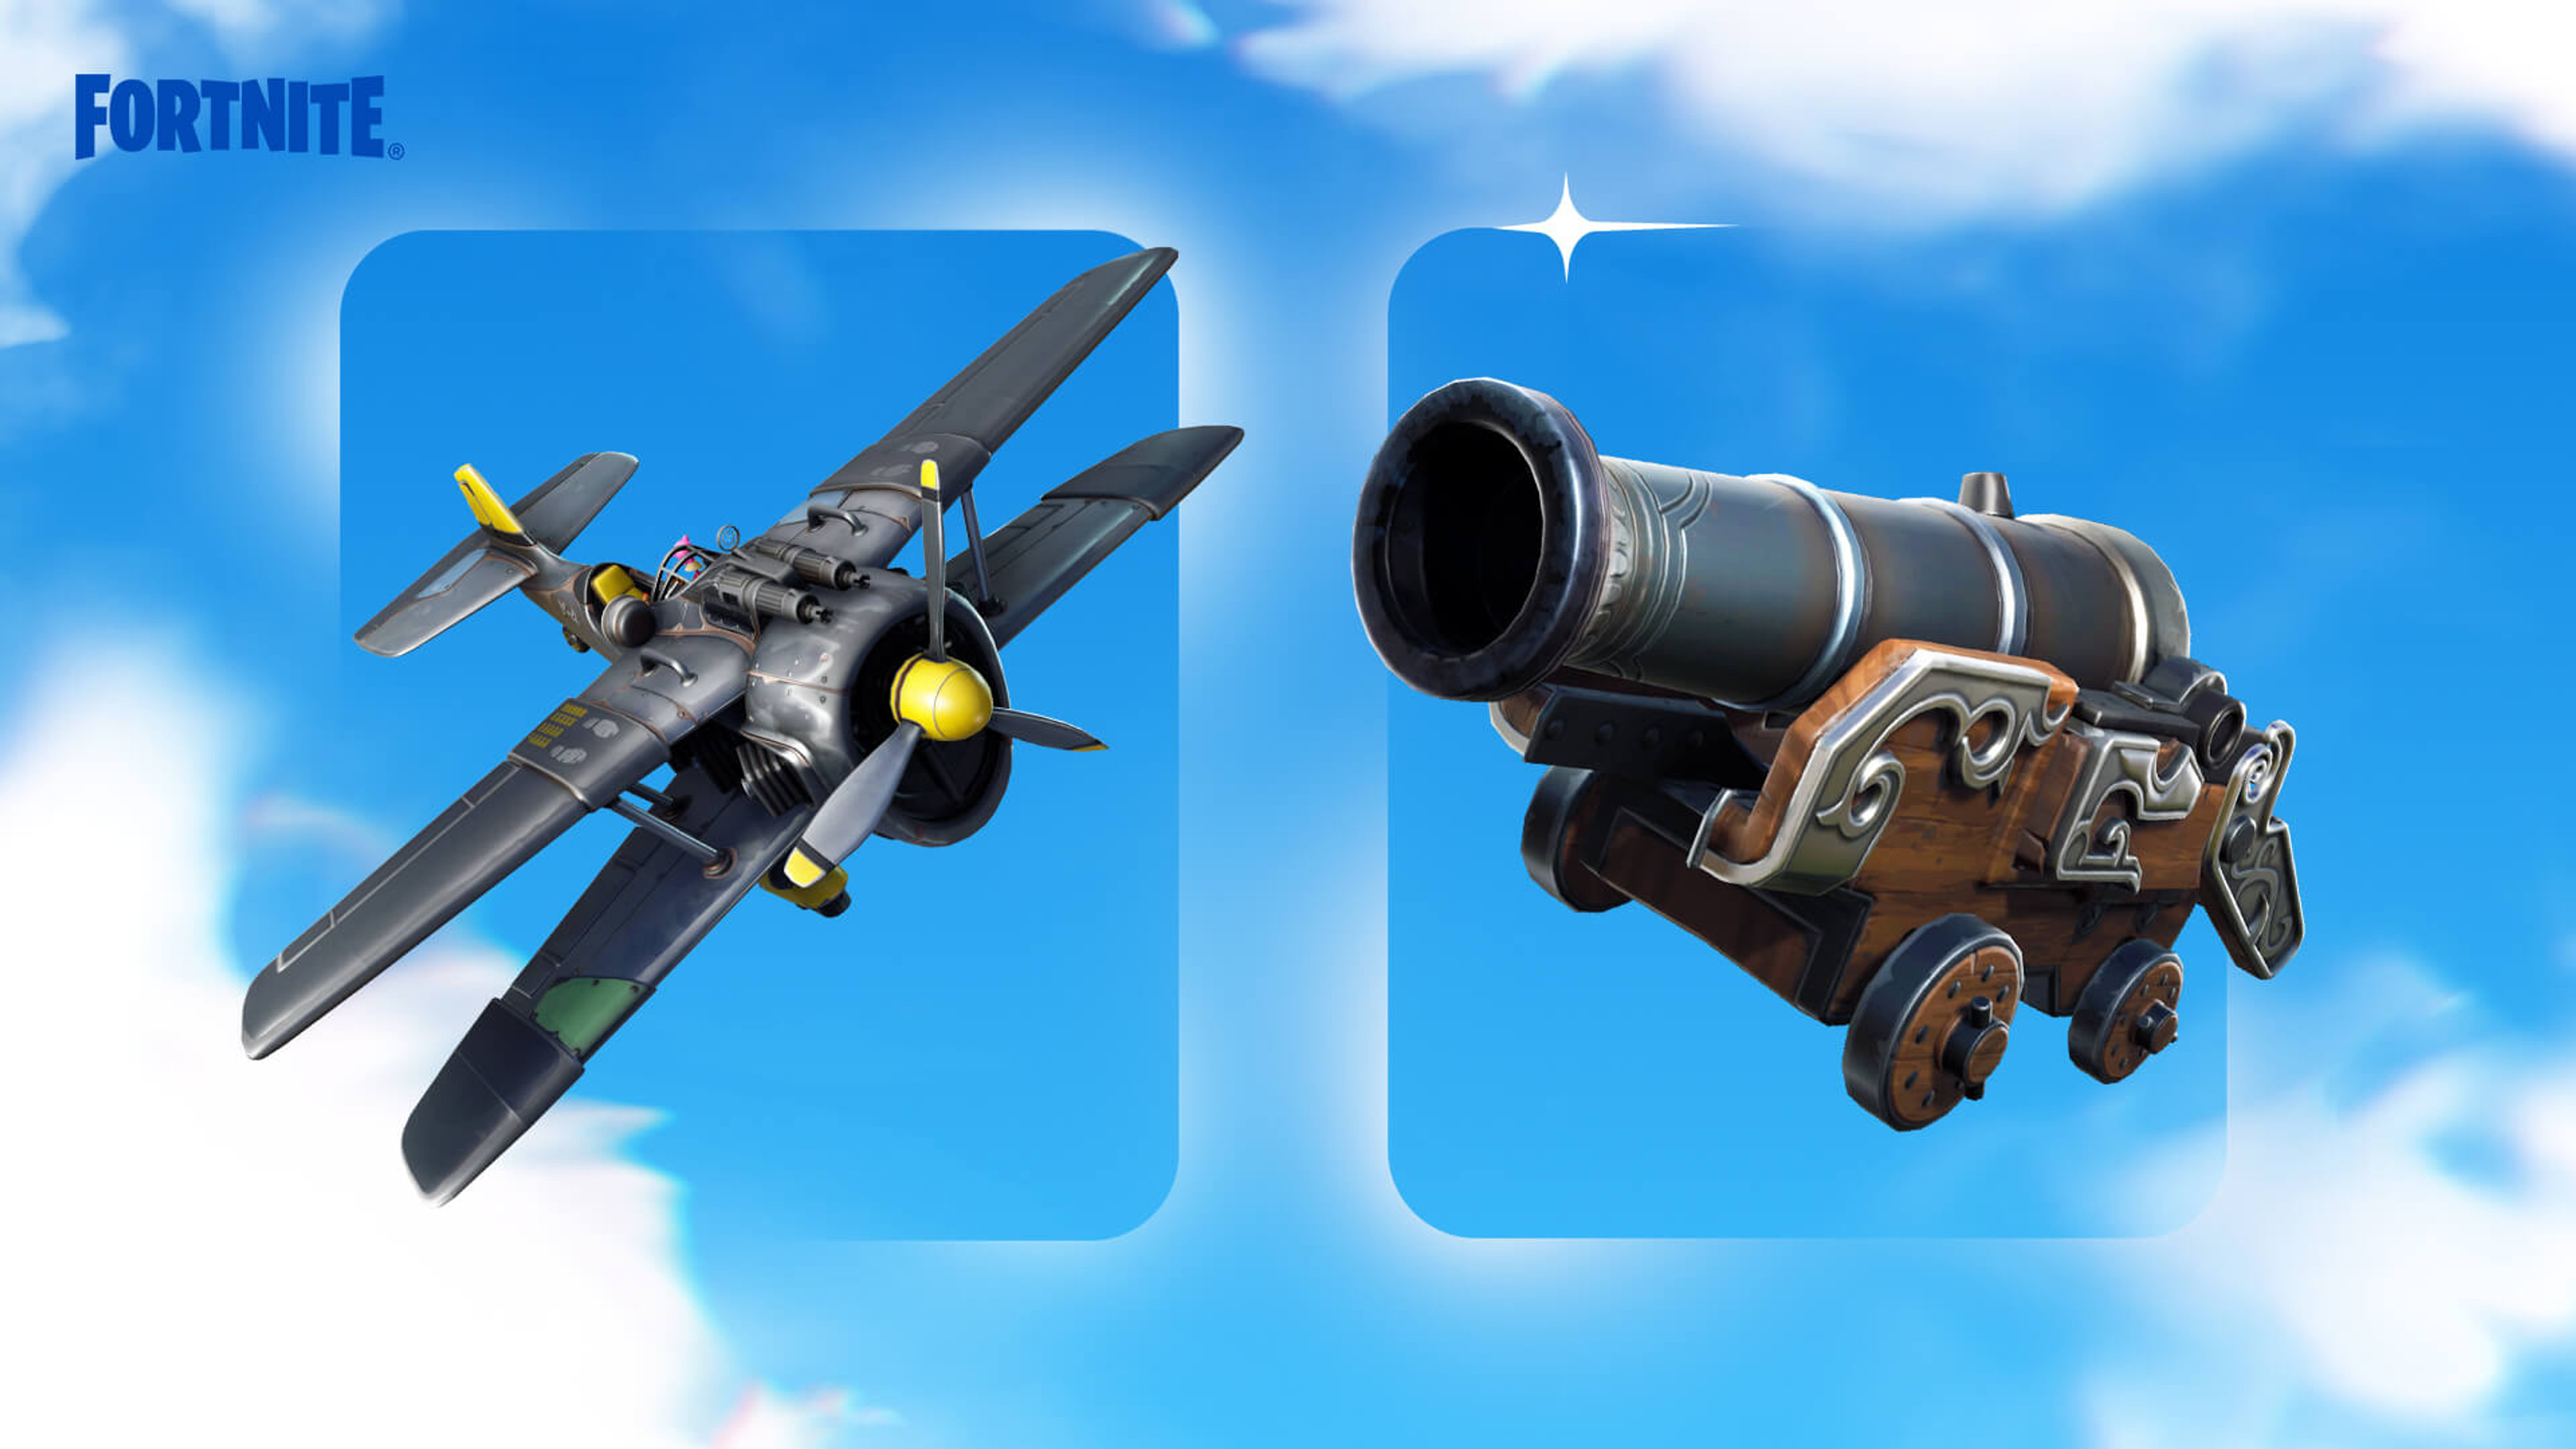 fortnite-ogs-x-4-stormwing-and-pirate-cannon-1920x1080-881b970b162c